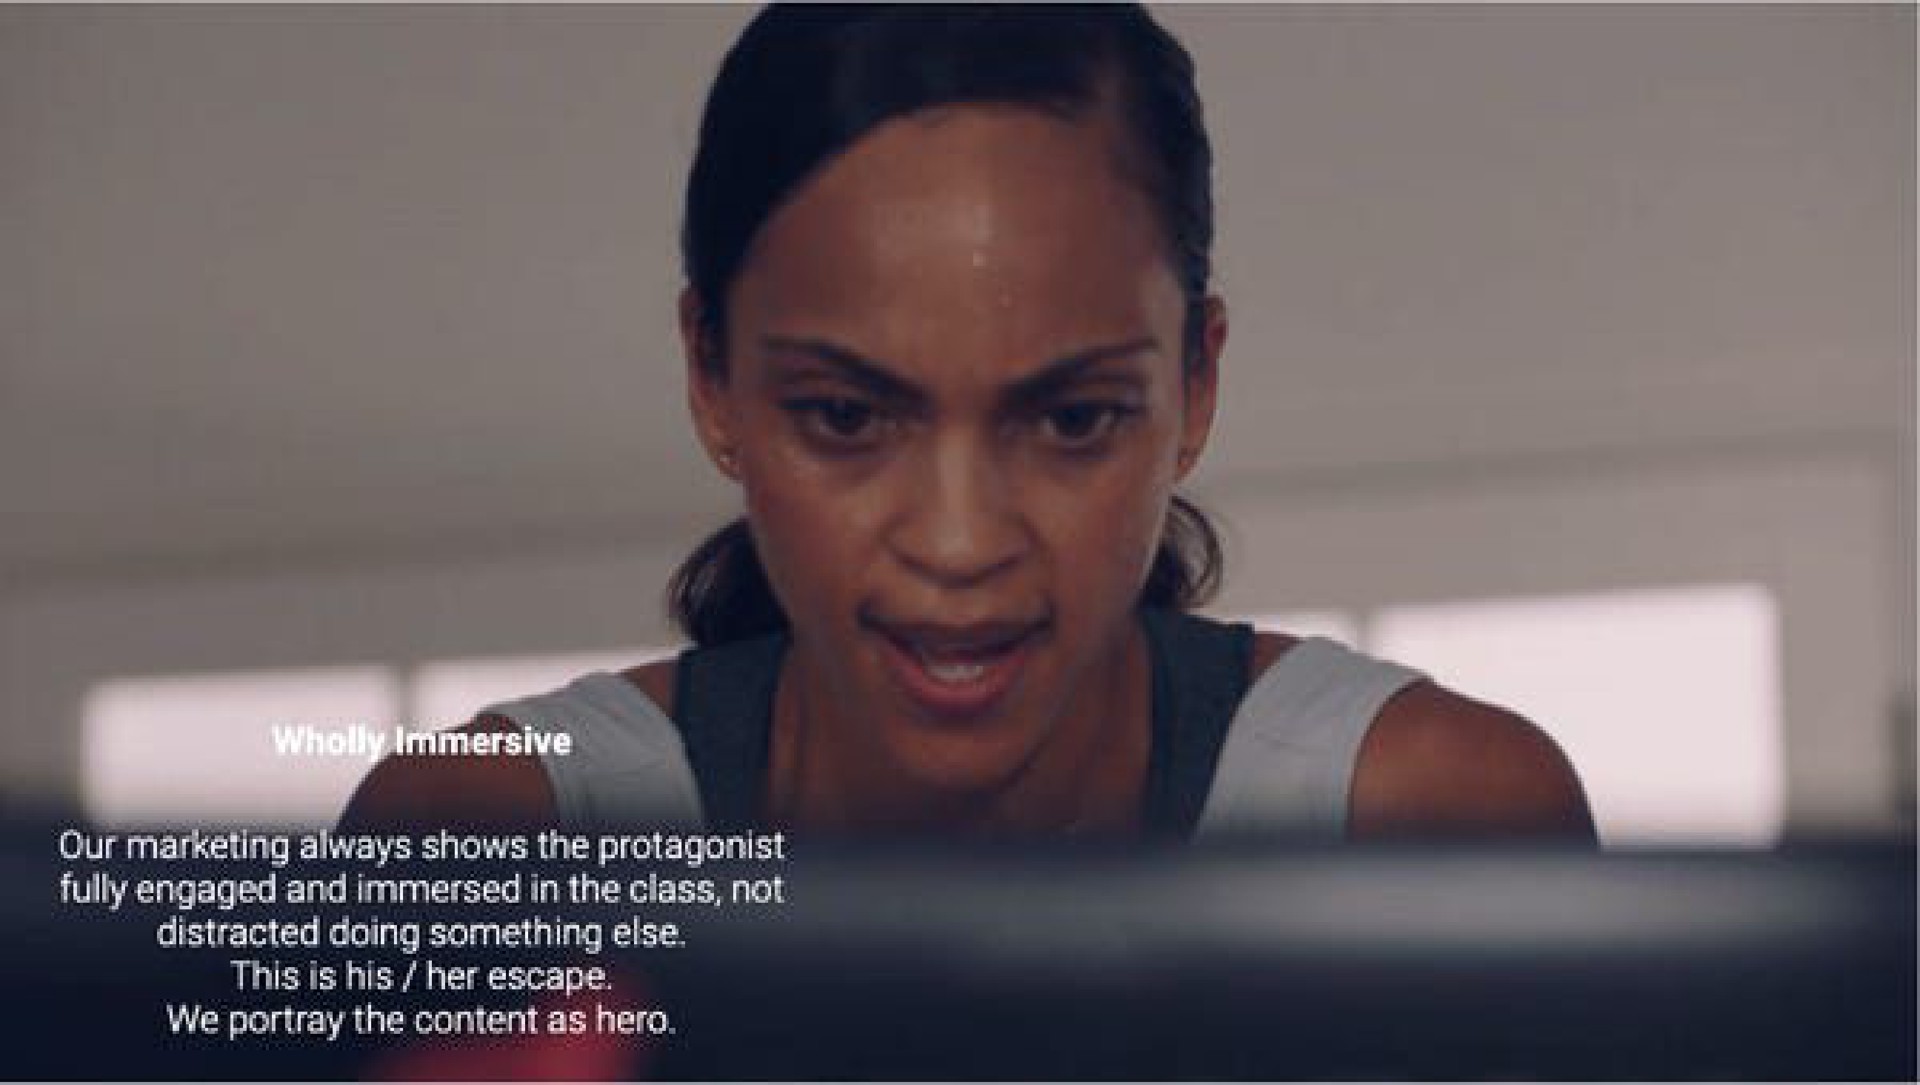 we portray the content as hero shows the protagonist and immersed in the class not distracted doing something else this is his her escape | Peloton